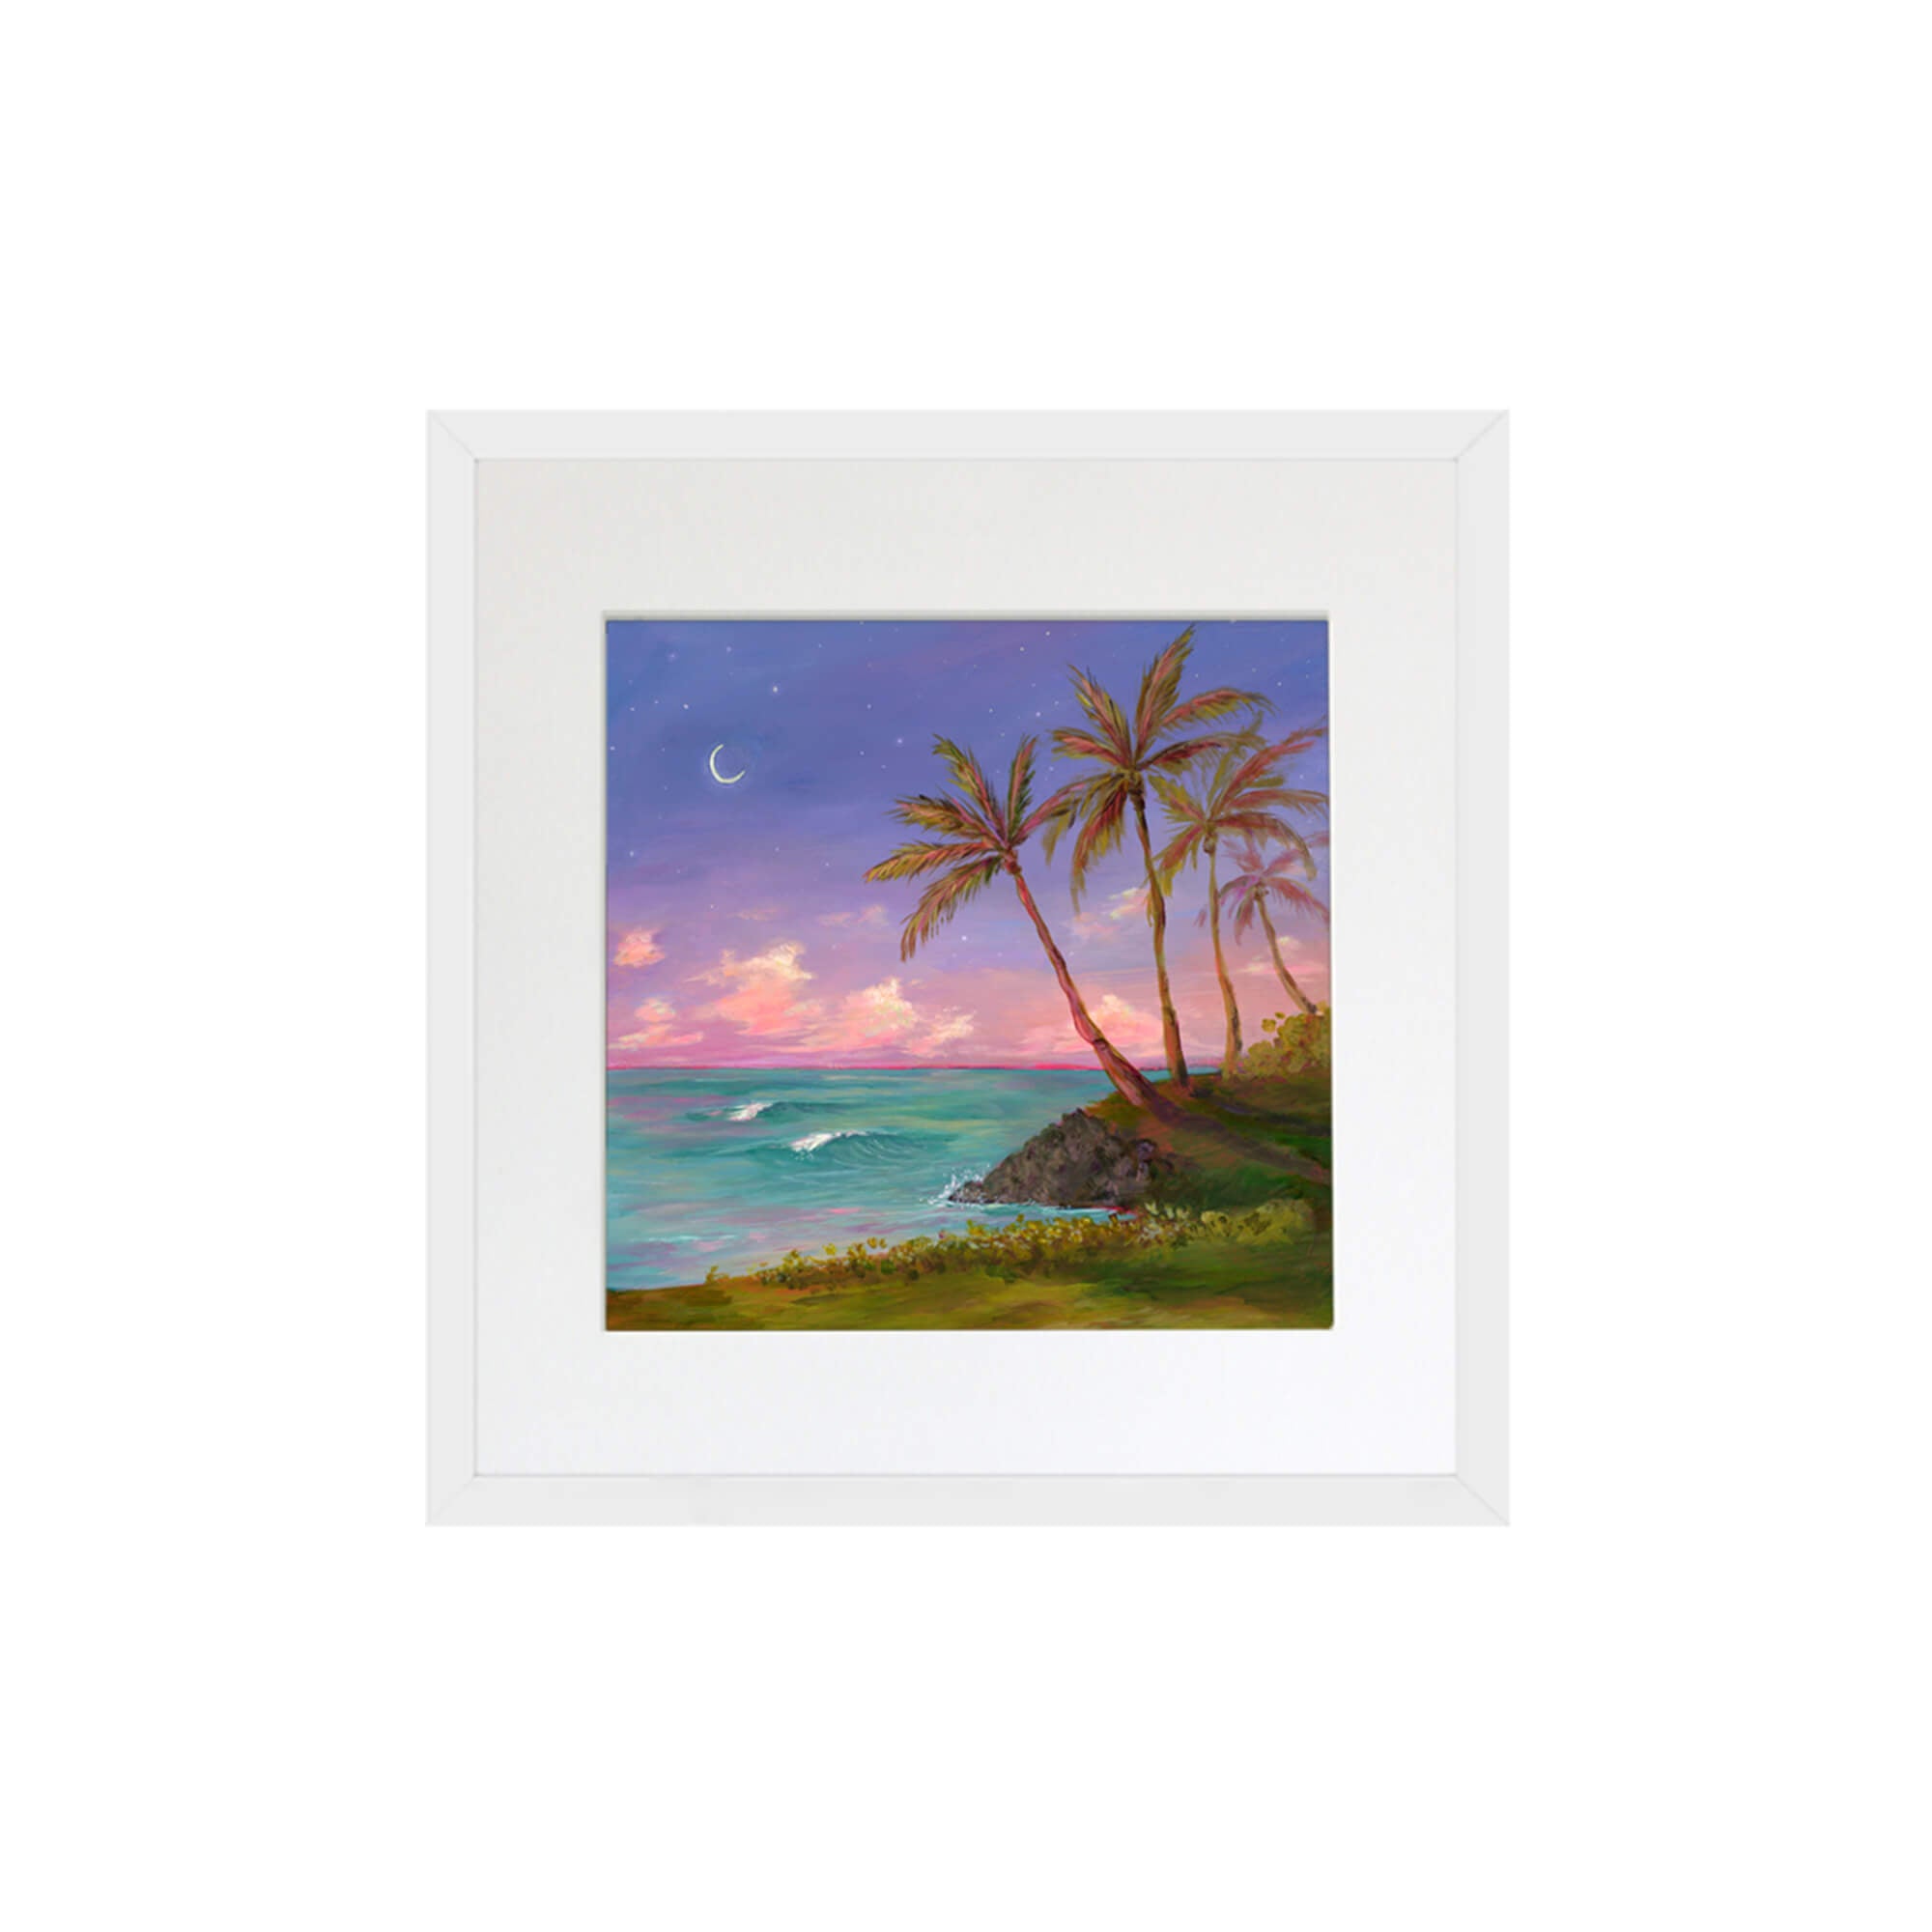 A view from a cliff with teal colored ocean and pastel sky by Hawaii artist Lindsay Wilkins